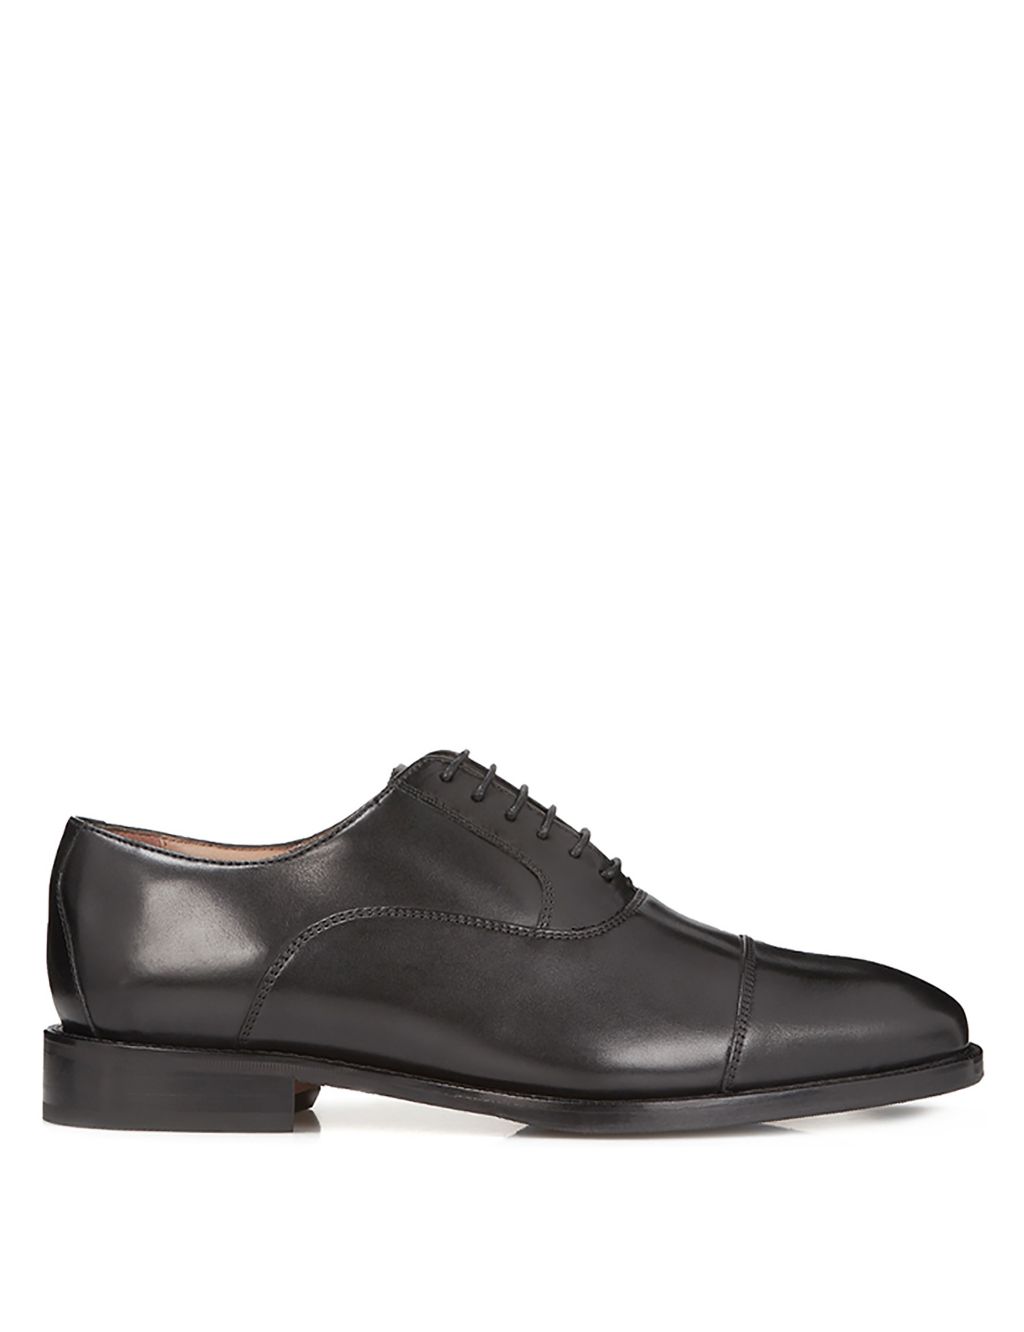 Wide Fit Leather Oxford Shoes image 1